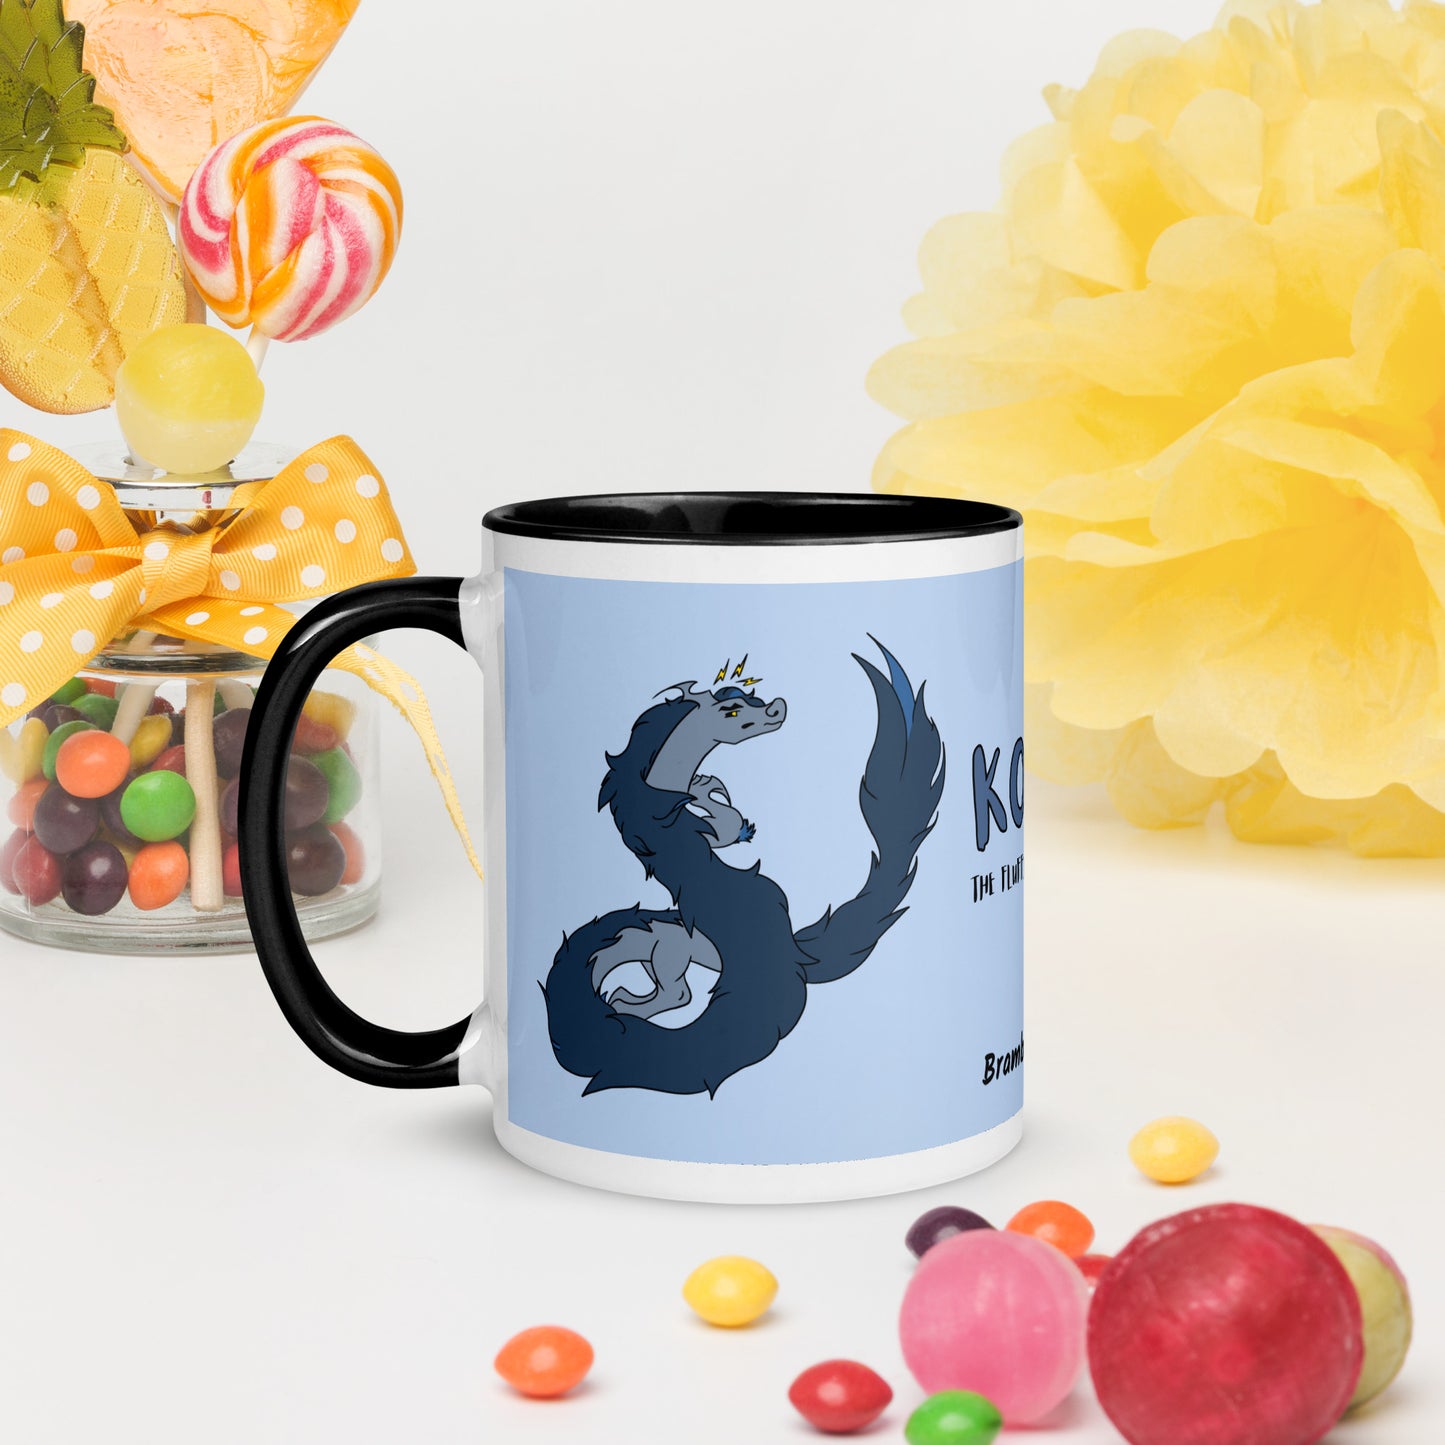 11 ounce ceramic mug featuring a double-sided image of angry Korvo the Fuzzy Noodle dragon against a light blue background.  Black inside and handle. Sitting on tabletop surrounded by candy and decorations.